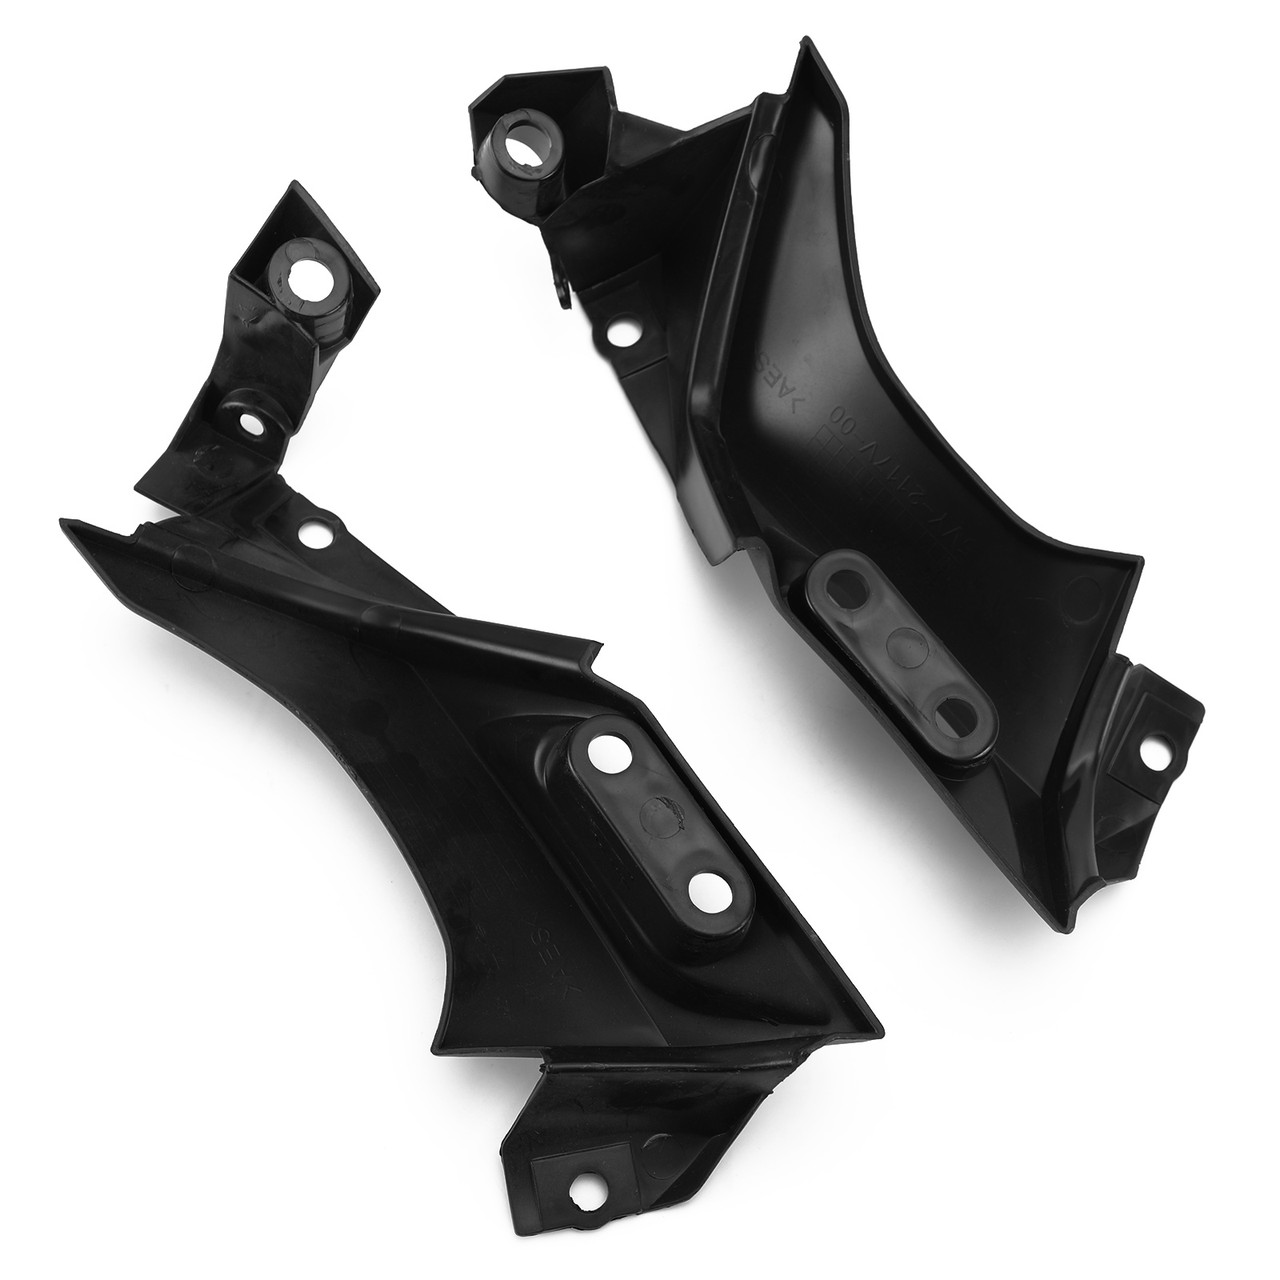 Side Frame Mid Cover Panel Fairing Fit for Yamaha YZF R1 2004-2006 BLK